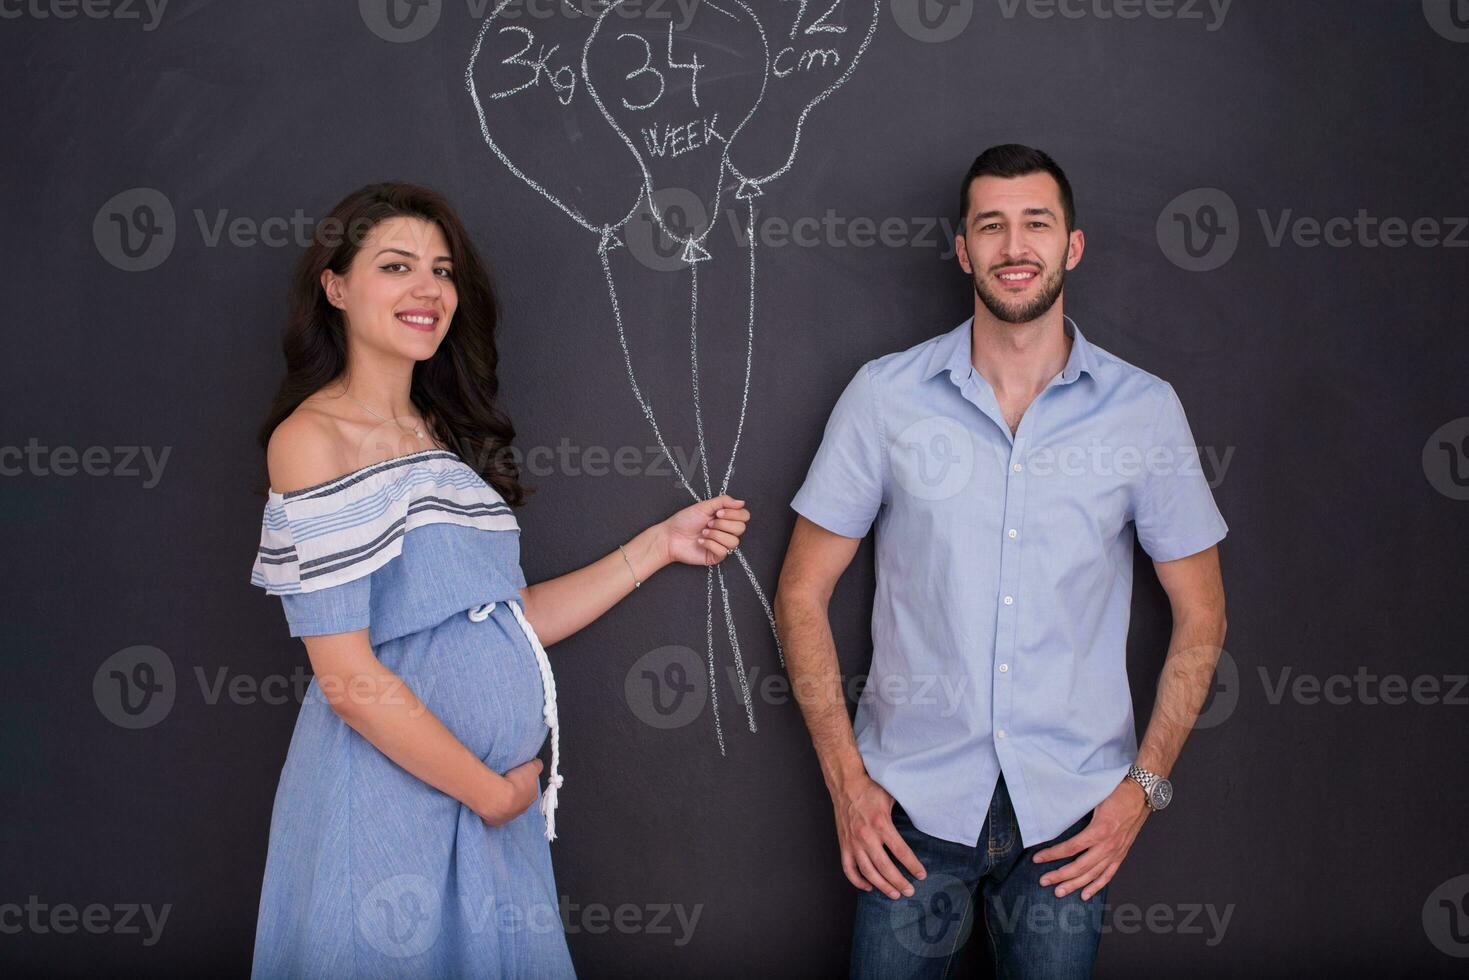 pregnant couple drawing their imaginations on chalk board photo